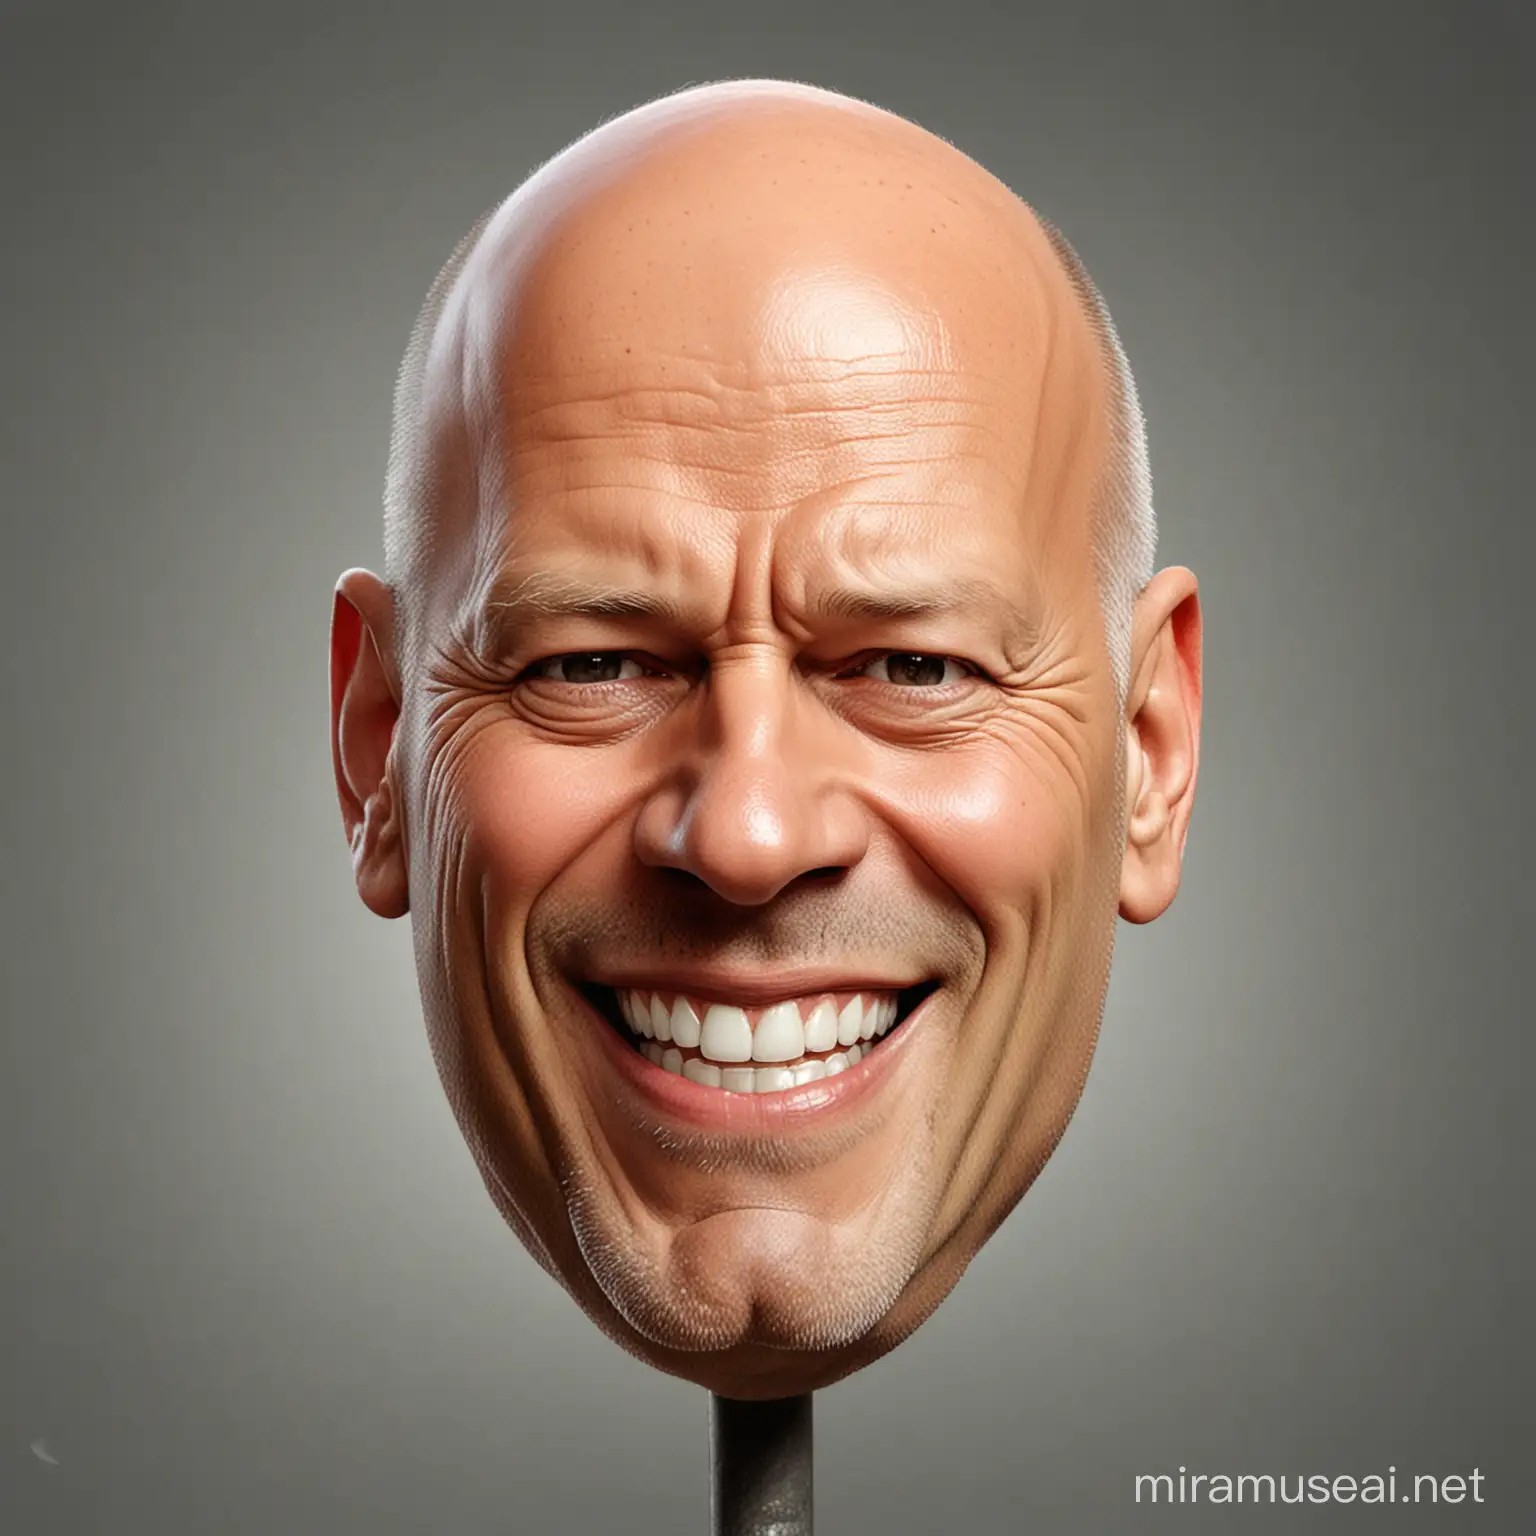 Smiling Caricature A Mix of The Rock and Bruce Willis